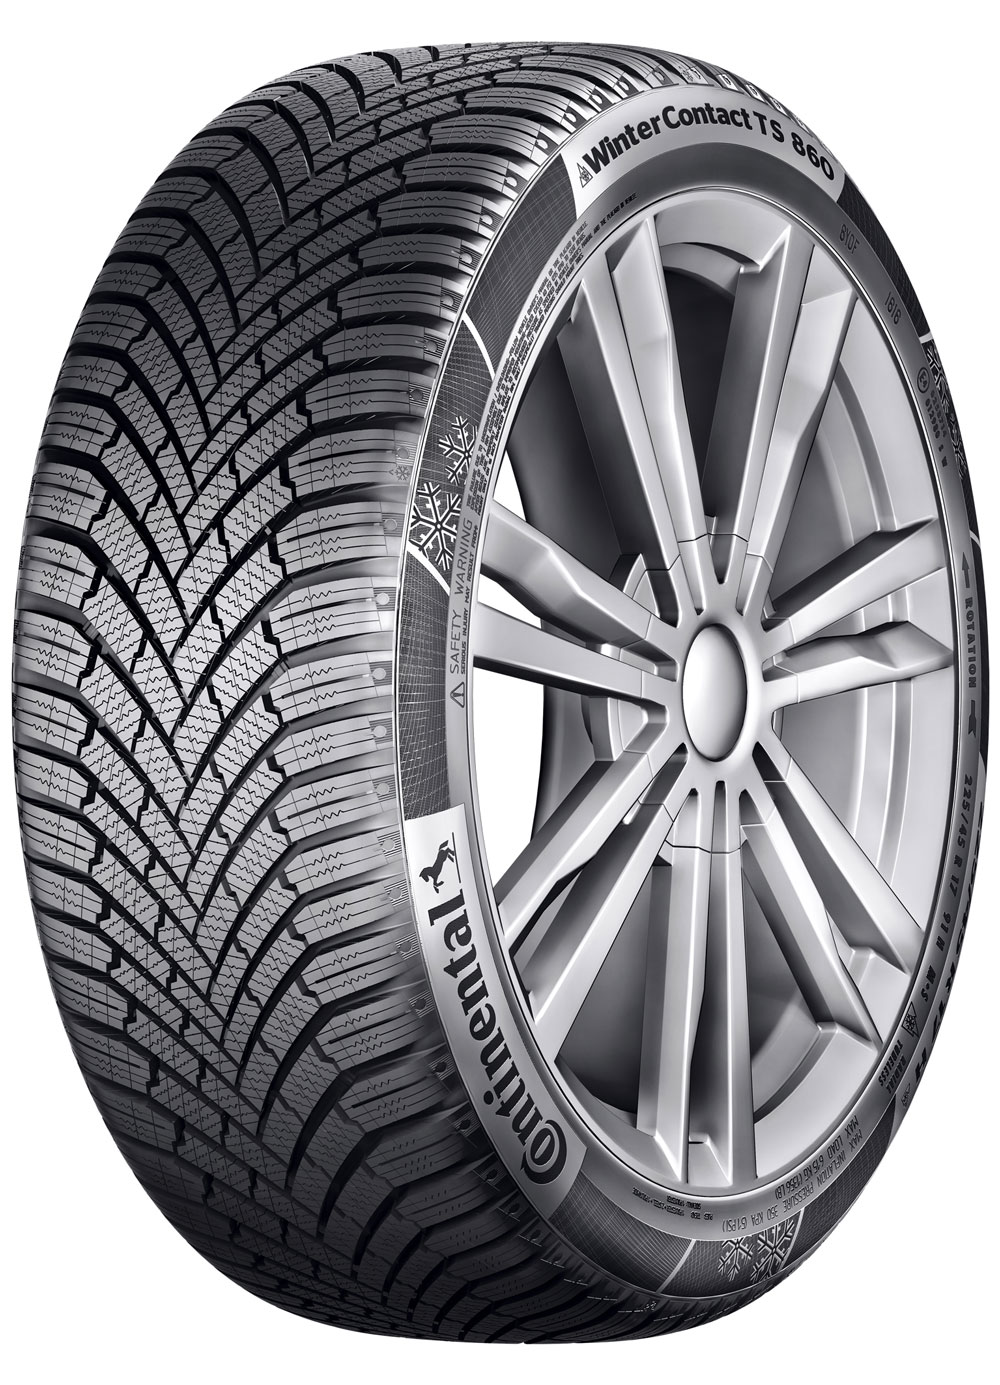 Anvelopa Iarna Continental Winter Contact Ts860 155/80R13 79T